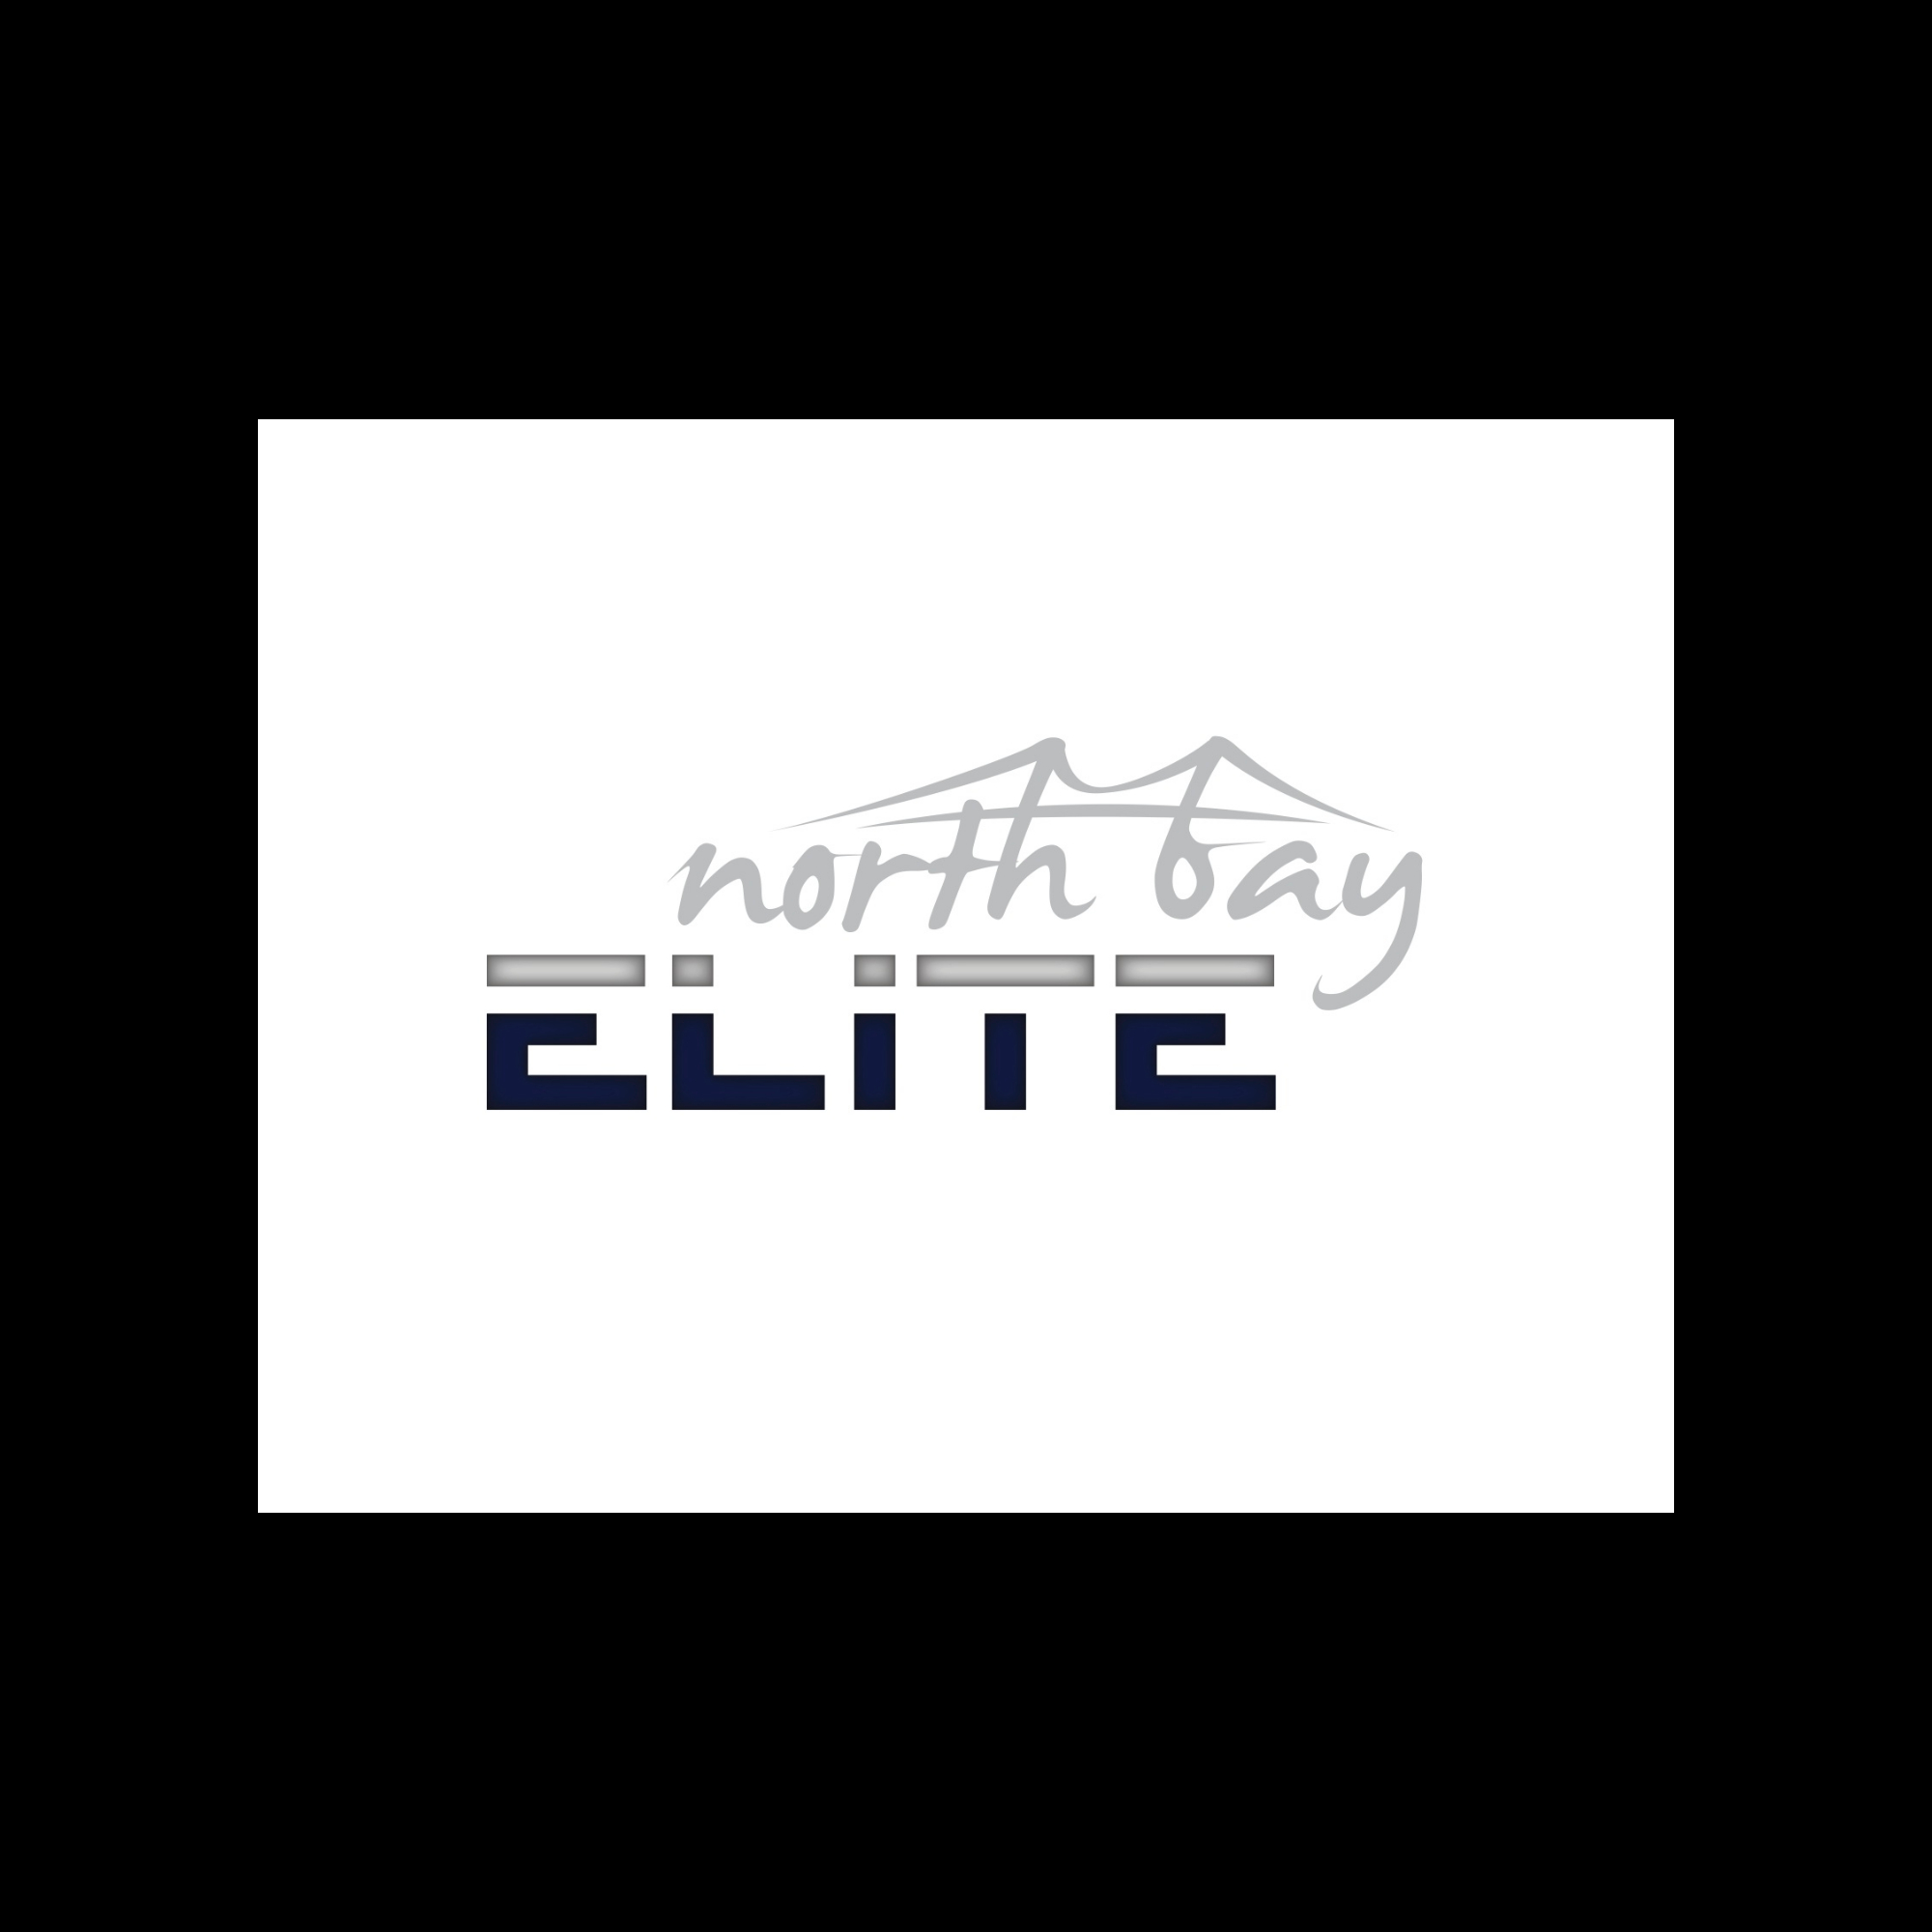 The official logo of North Bay Elite